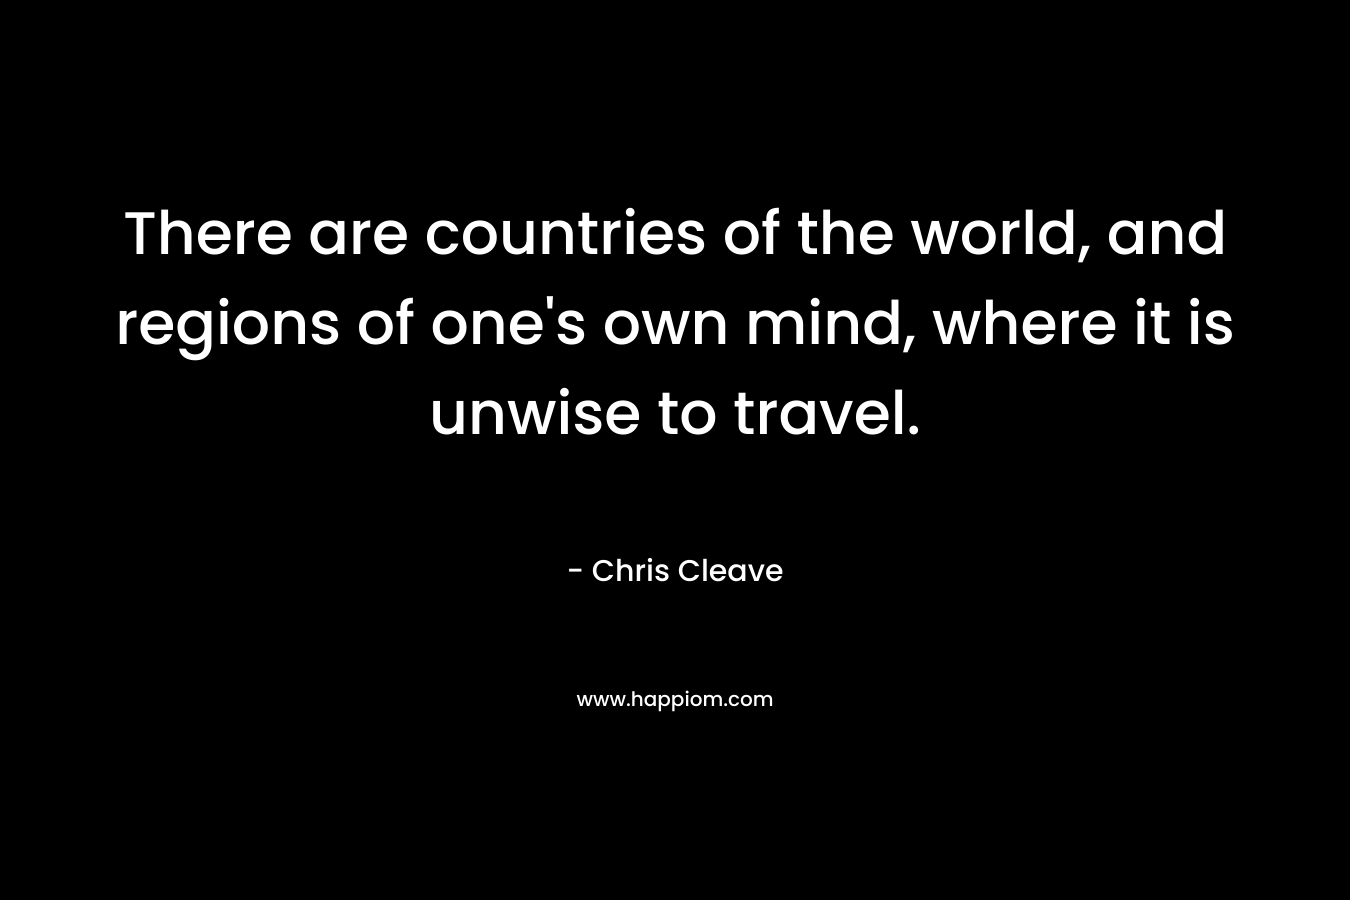 There are countries of the world, and regions of one’s own mind, where it is unwise to travel. – Chris Cleave